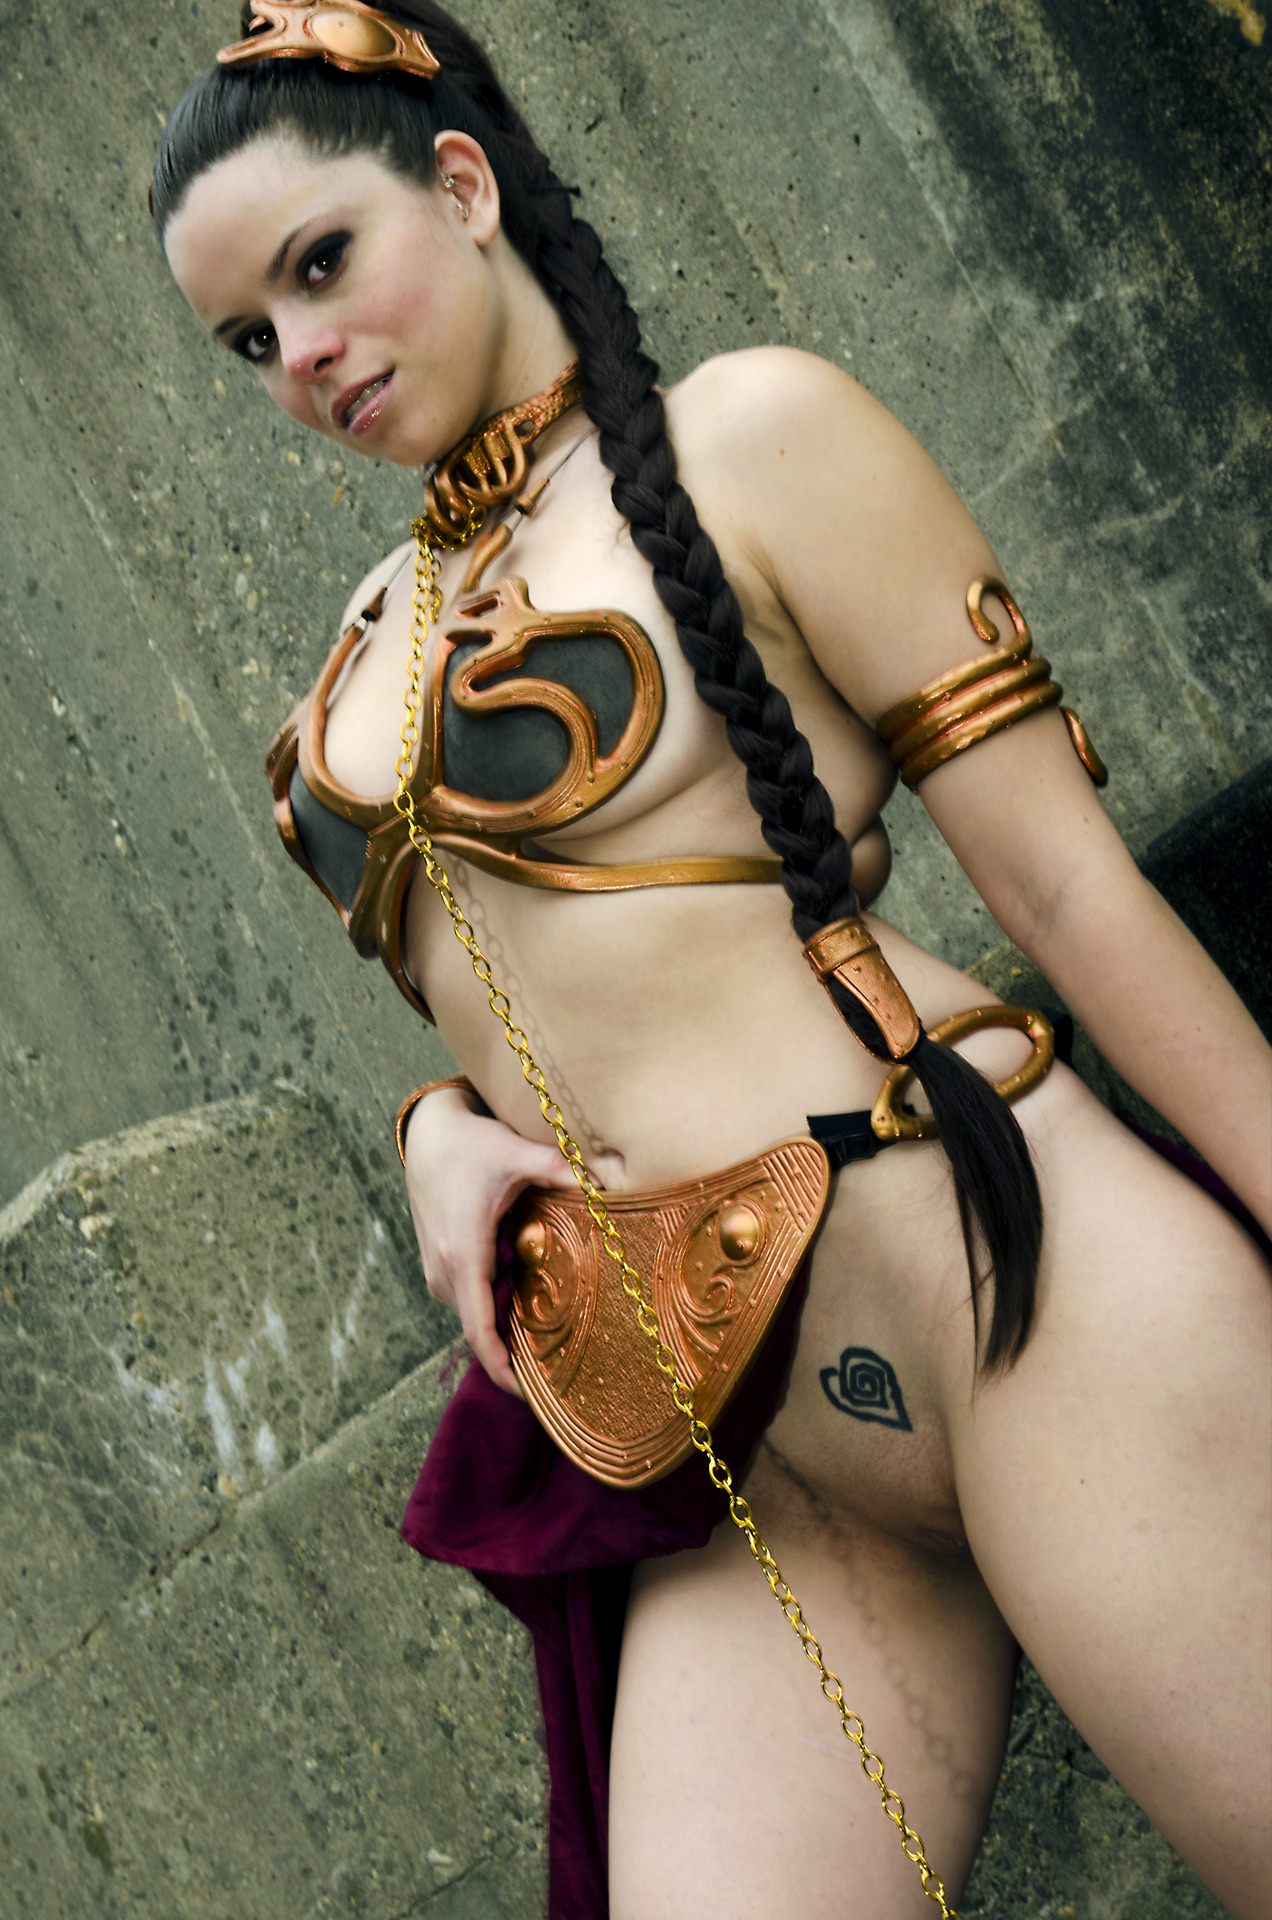 slave leia flashes her pussy.jpg. 